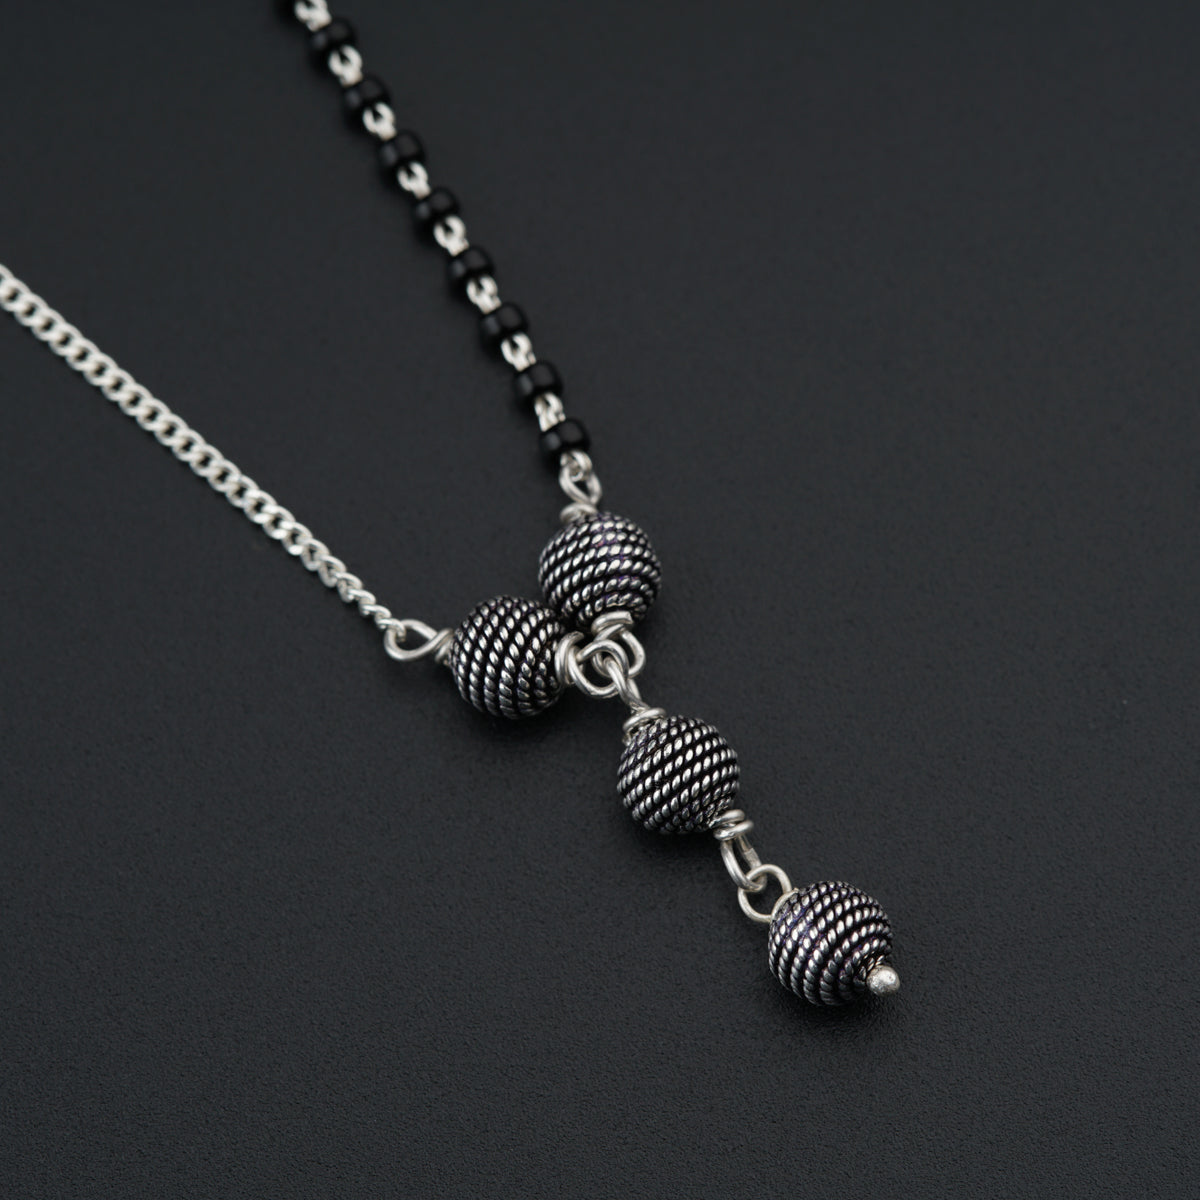 a black and white necklace with two balls on it